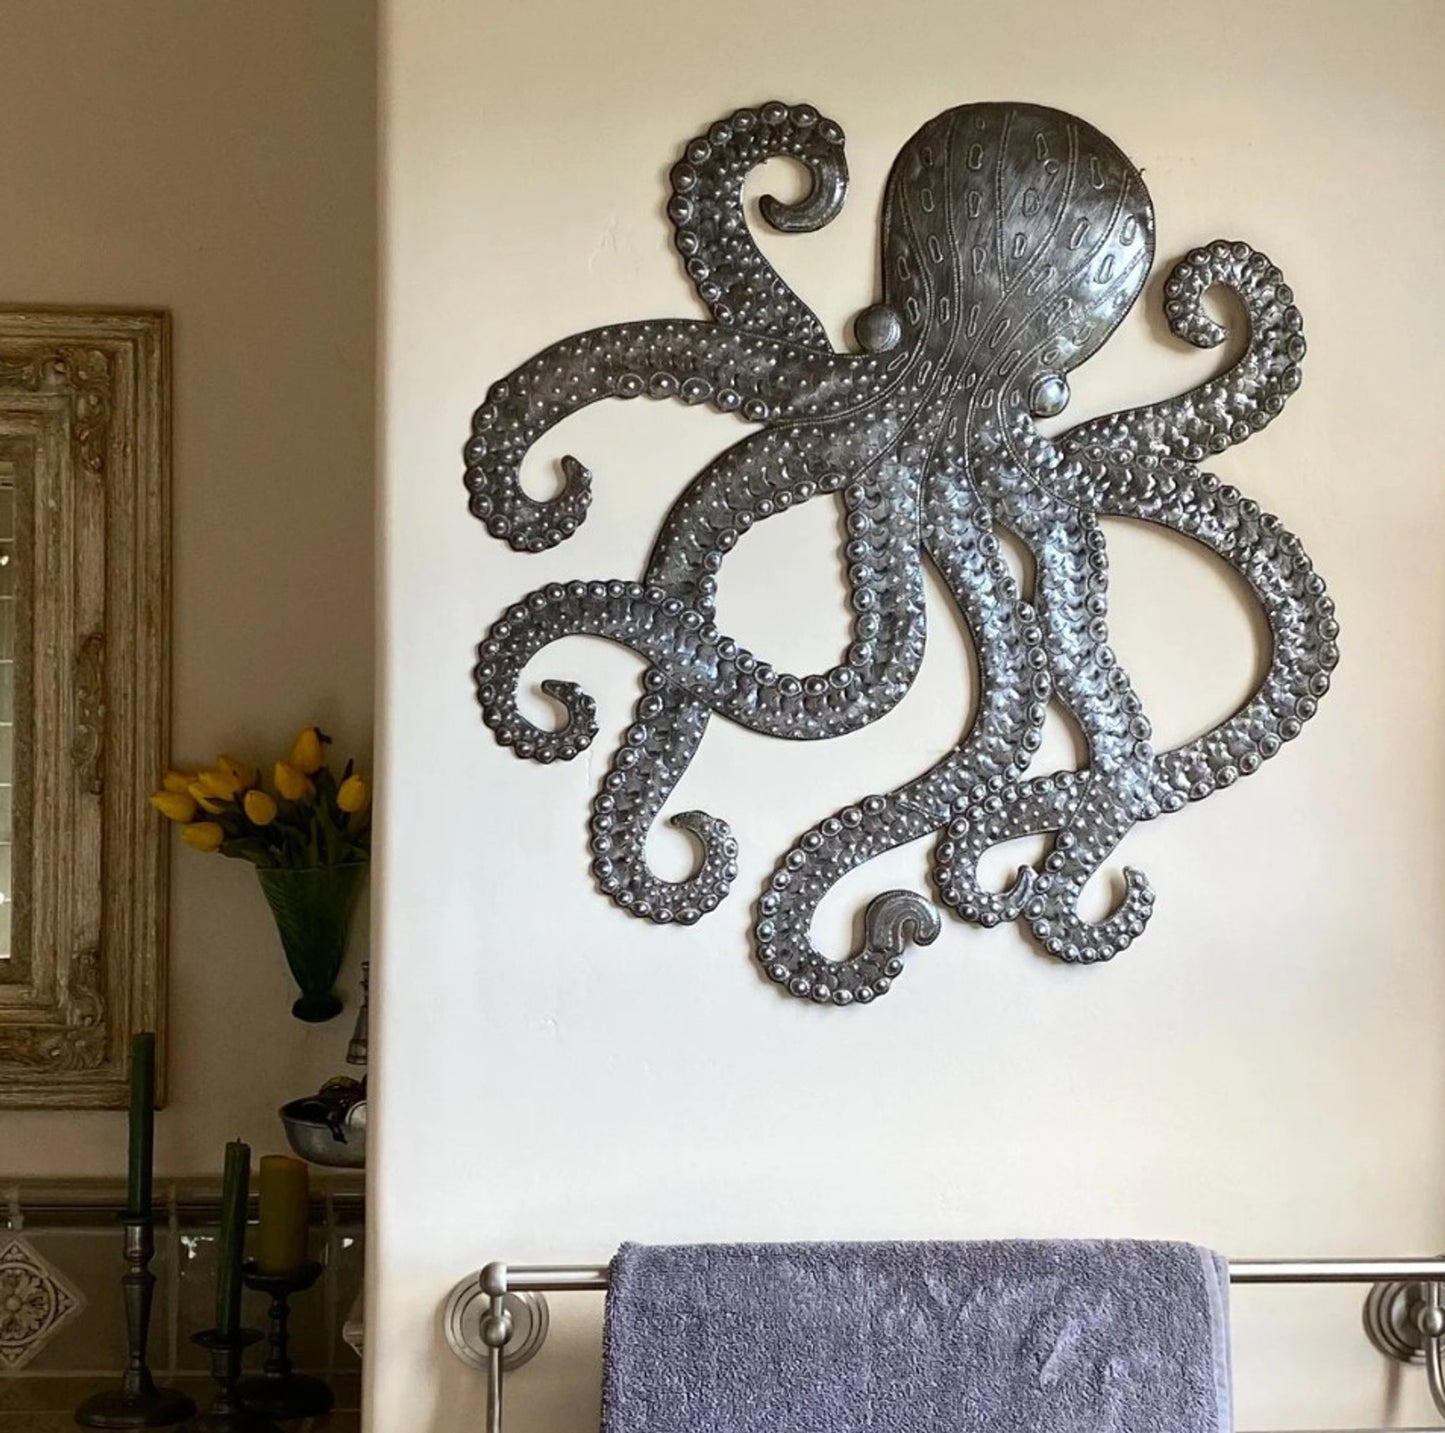 Handcrafted Octopus Sea Wall Hanging Art 23"